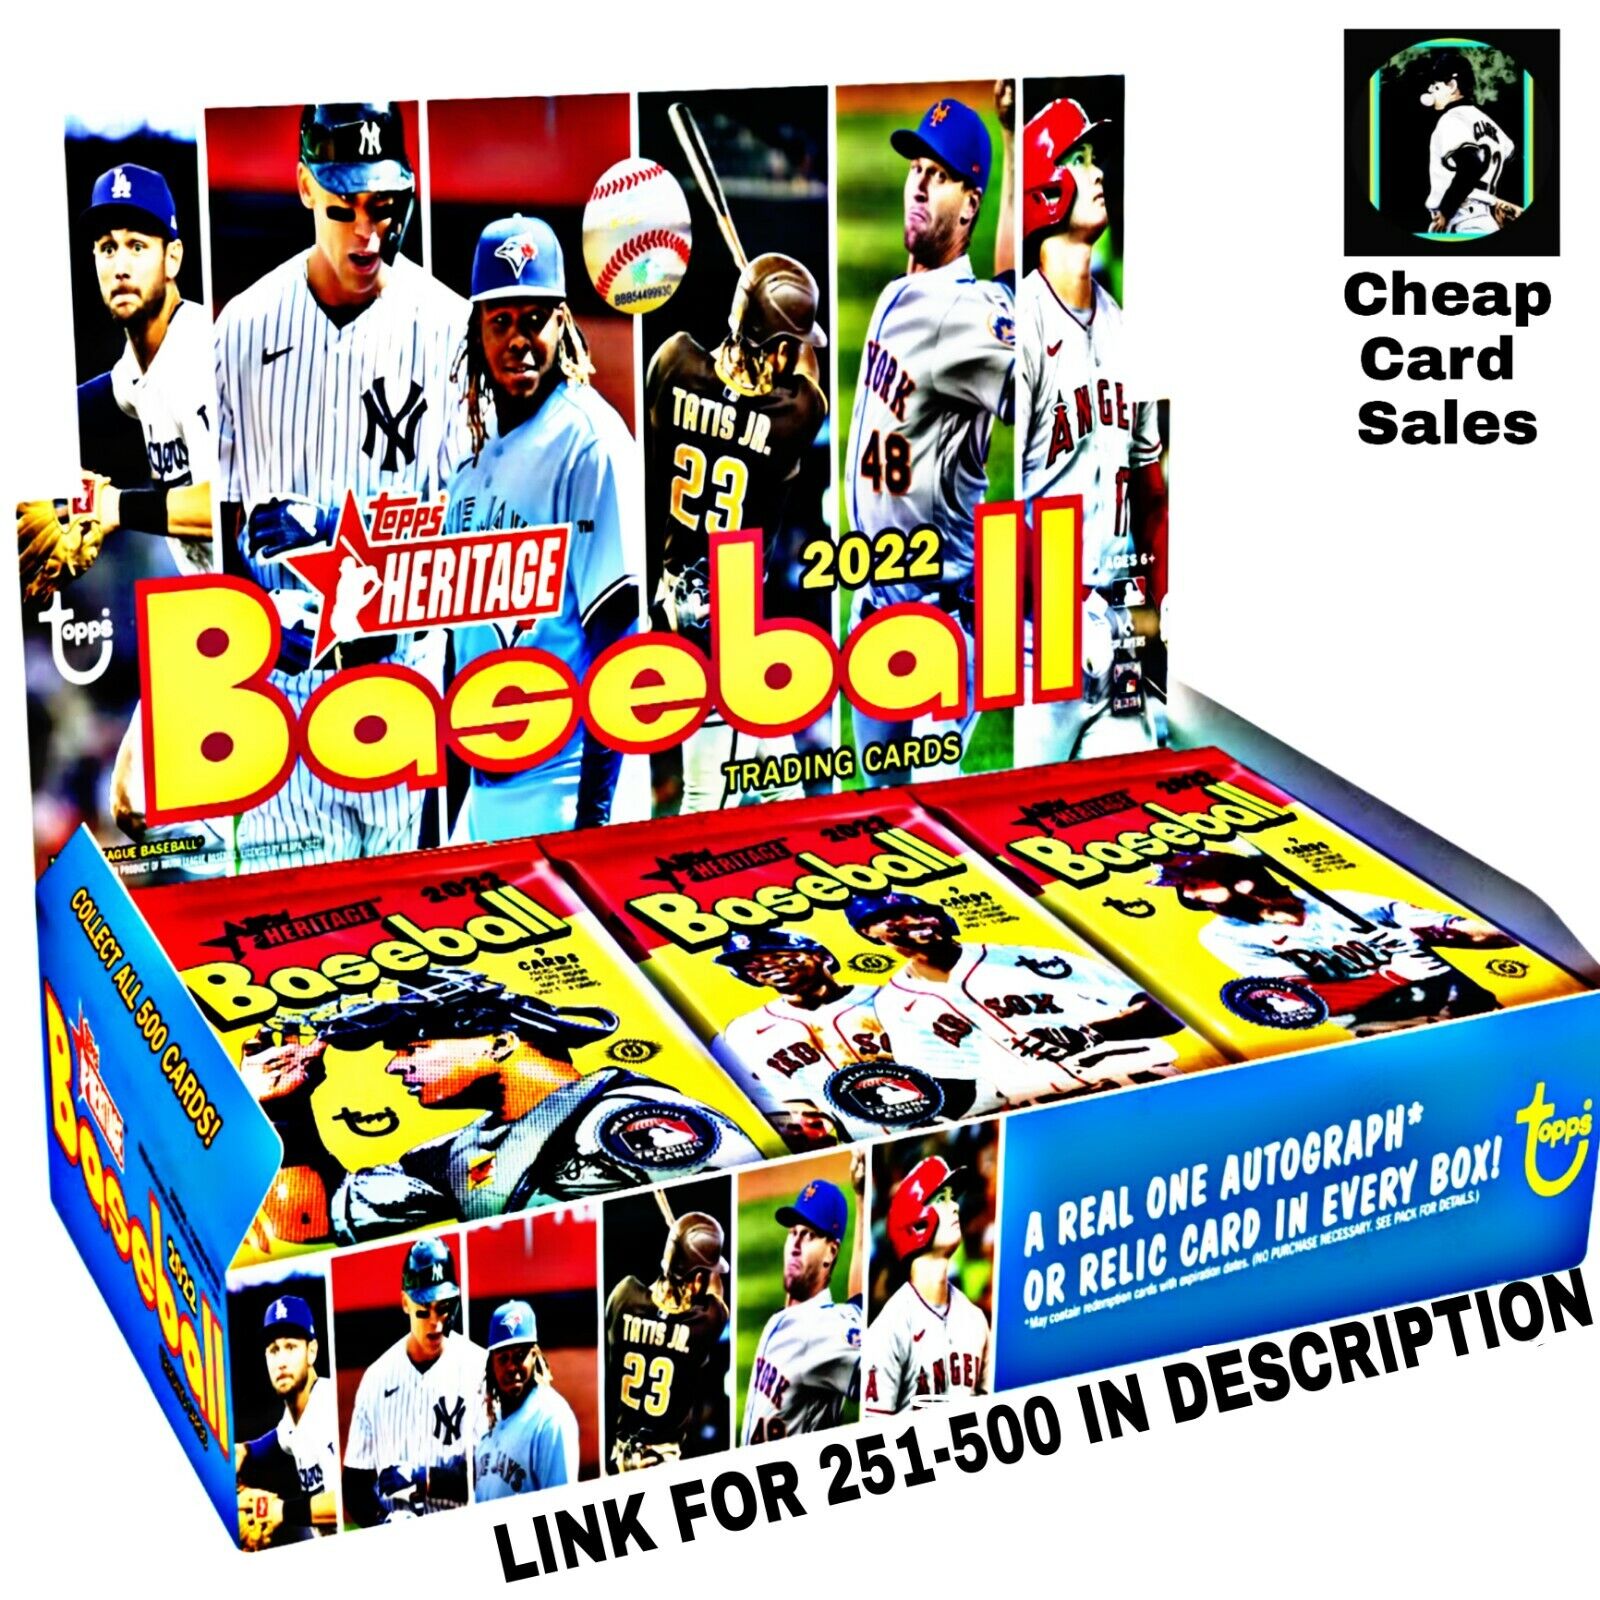 2022 Topps Heritage Baseball [Pick Your Card/Complete Your Set]